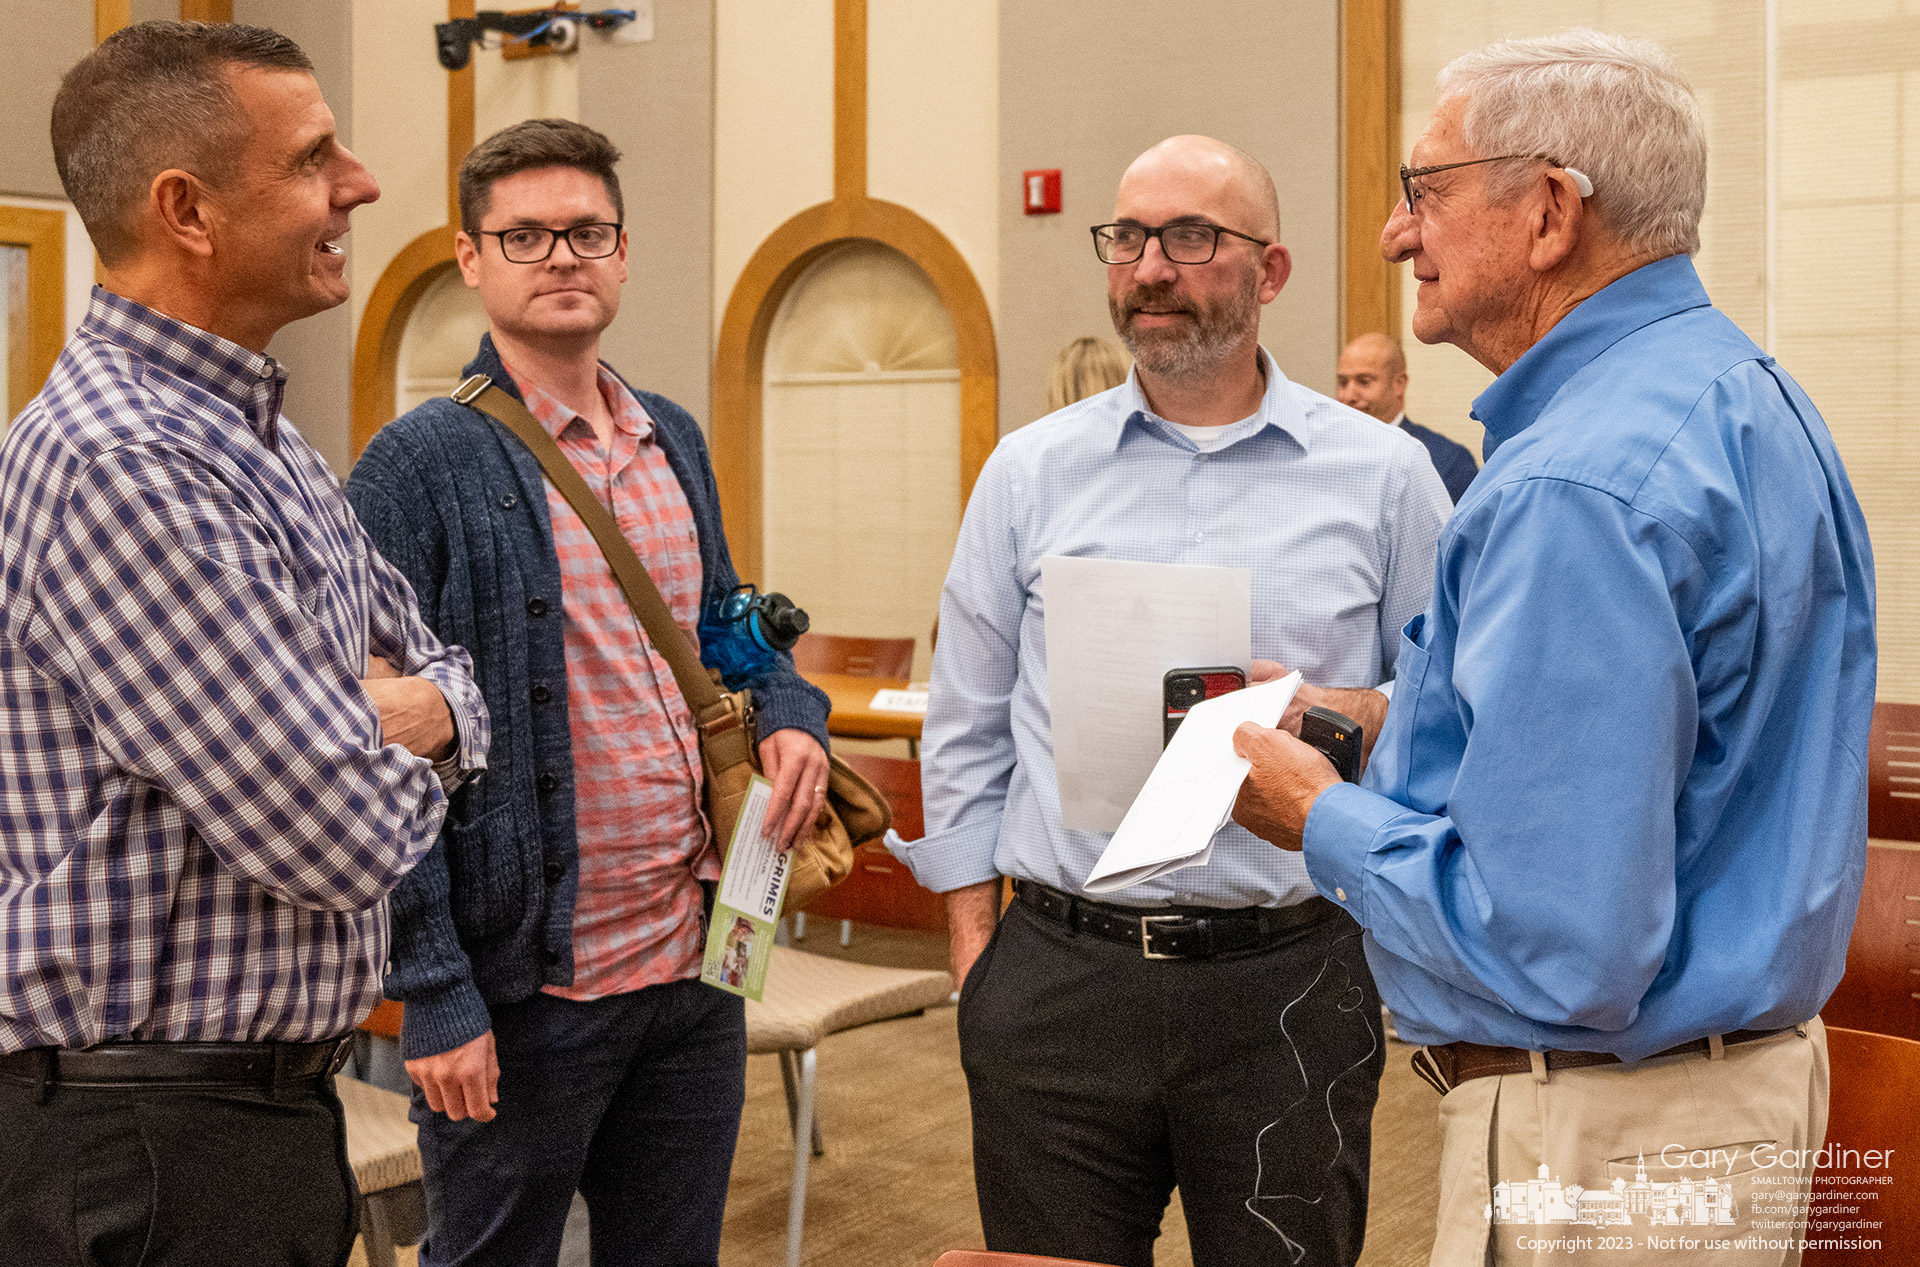 Tom Curry, right, talks with three Westerville City Council candidates after a council meeting where he spoke during citizens' comments about the lack of news media coverage of candidates for local elections. From left to right are candidates Aaron Glasgow, David Grimes, and Jeff Washburn. My Final Photo for October 17, 2023.